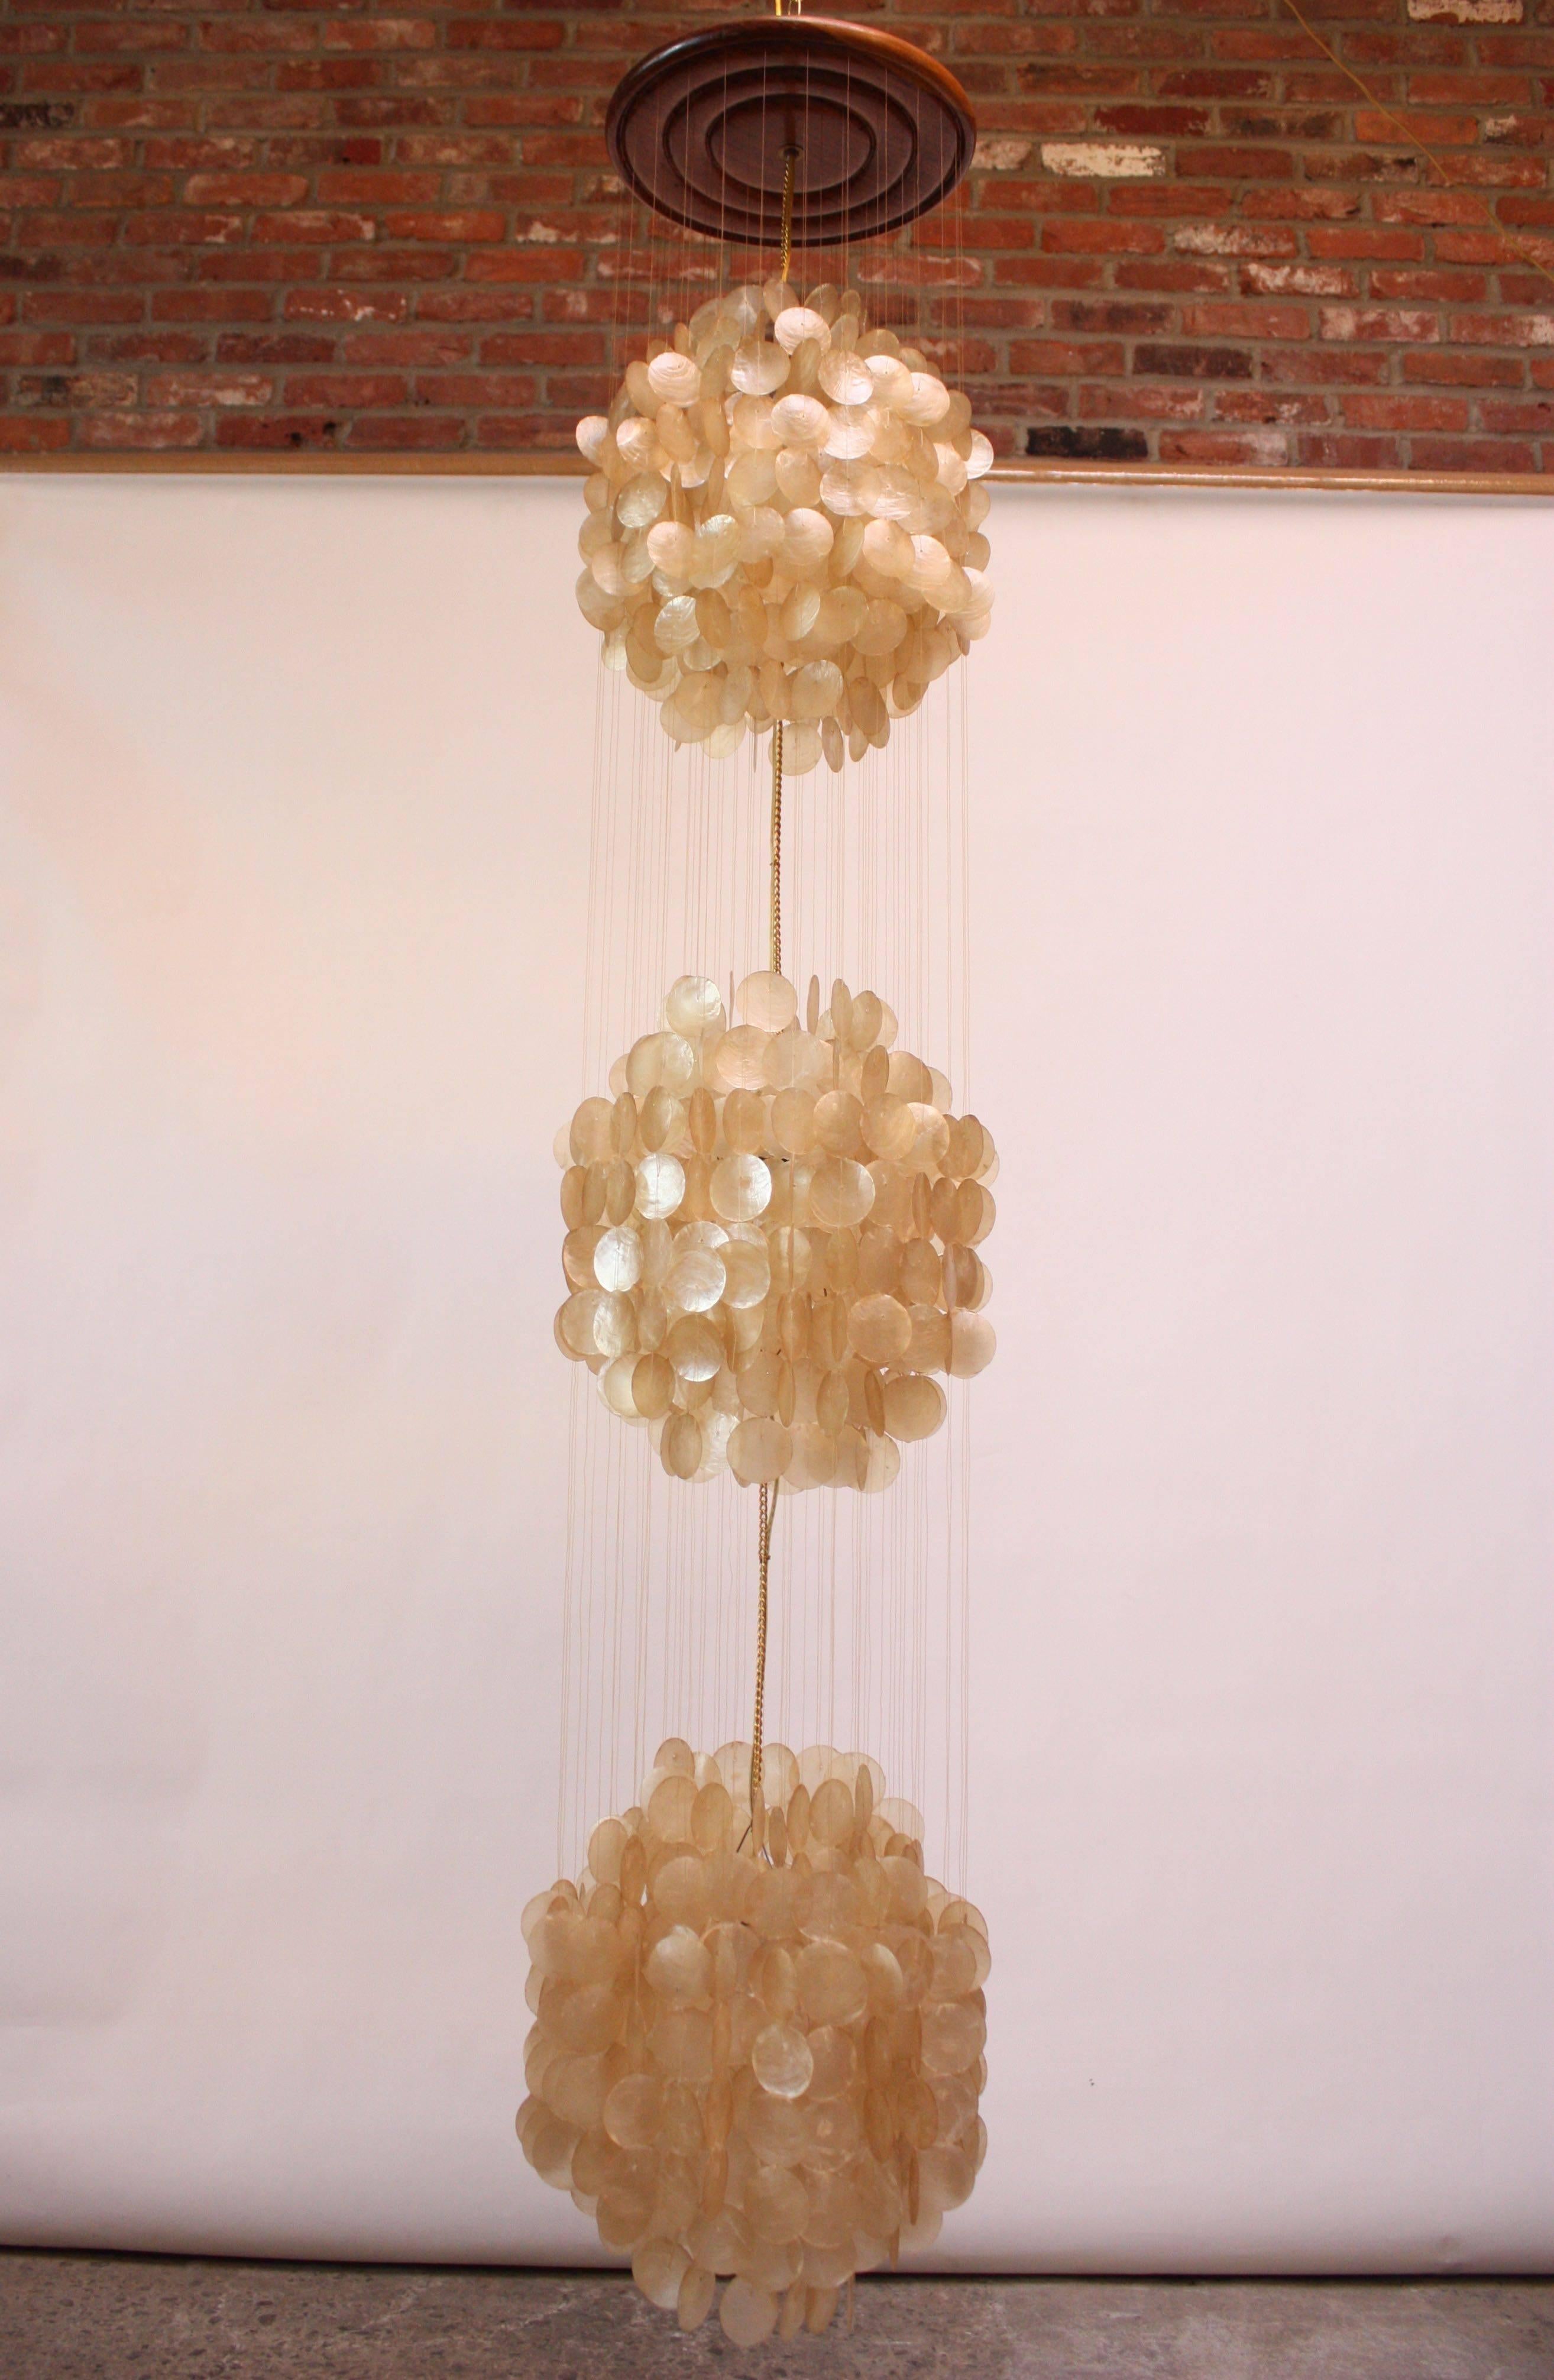 Spectacular three-tiered capiz shell fixture reminiscent of Panton's 1964 '3DM' design. Composed of nylon thread connecting the capiz shells to the top circular wood mount. Cord runs down the middle of the fixture, and each cluster of shells has its